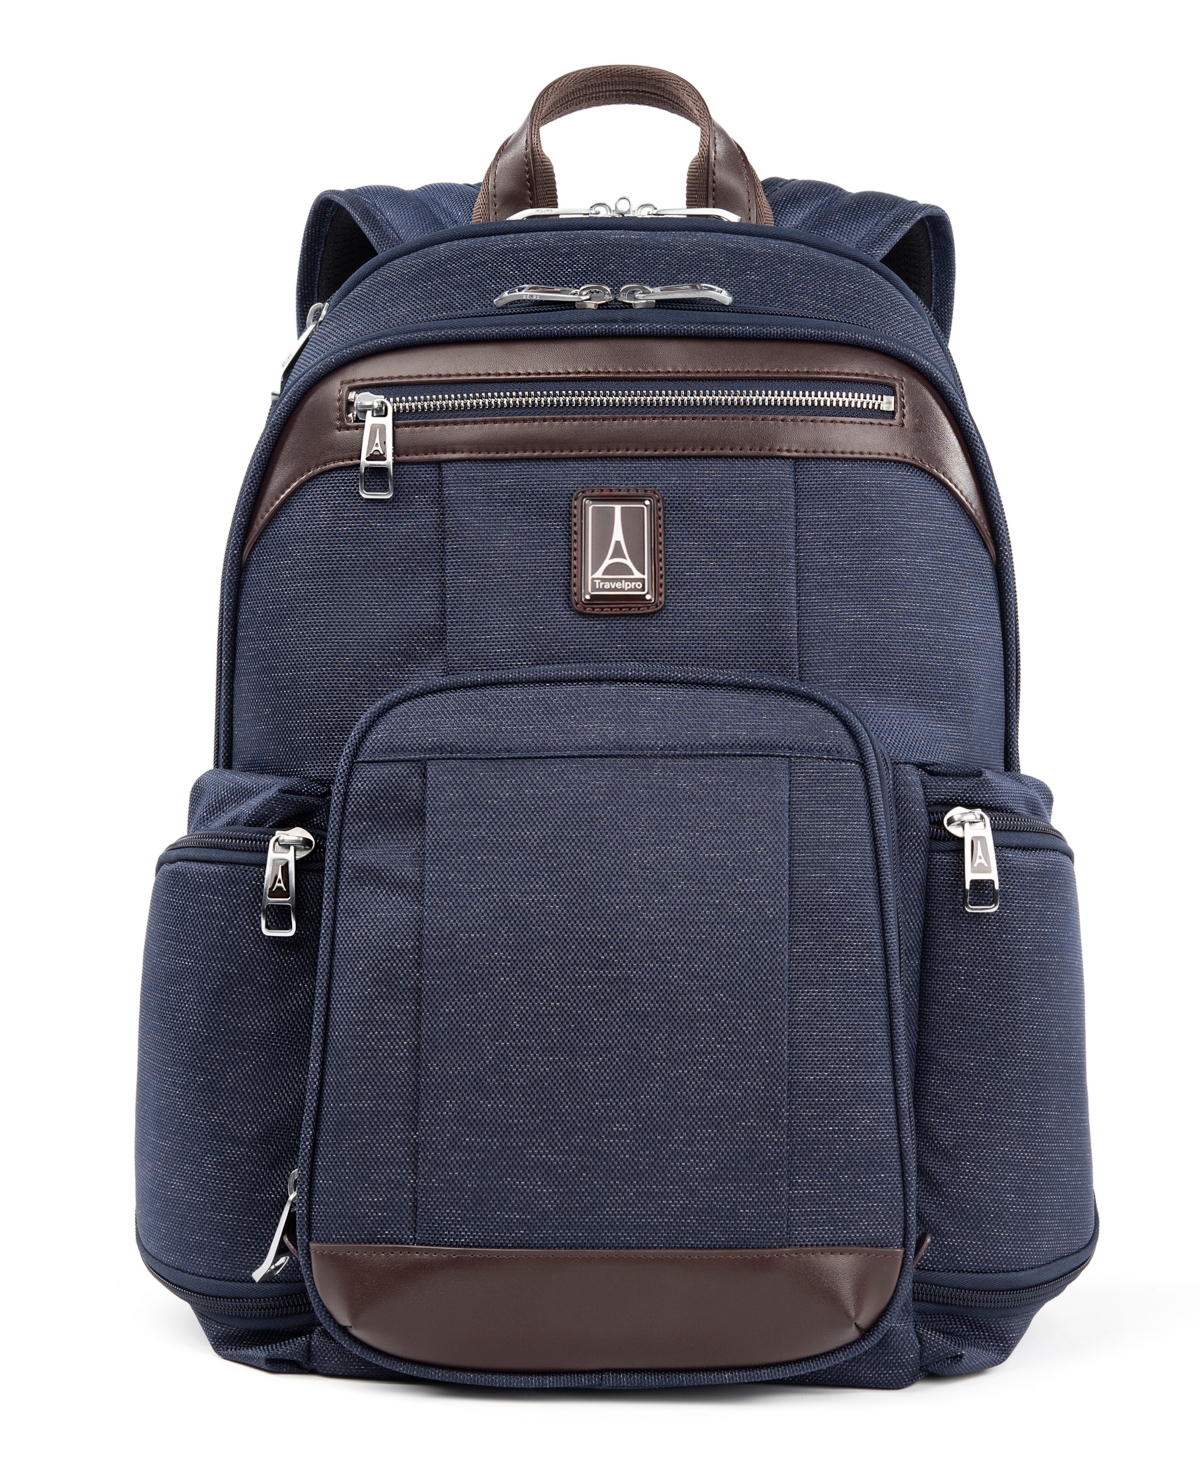 Platinum Elite Limited Edition Business Backpack - Limited Edition True Navy